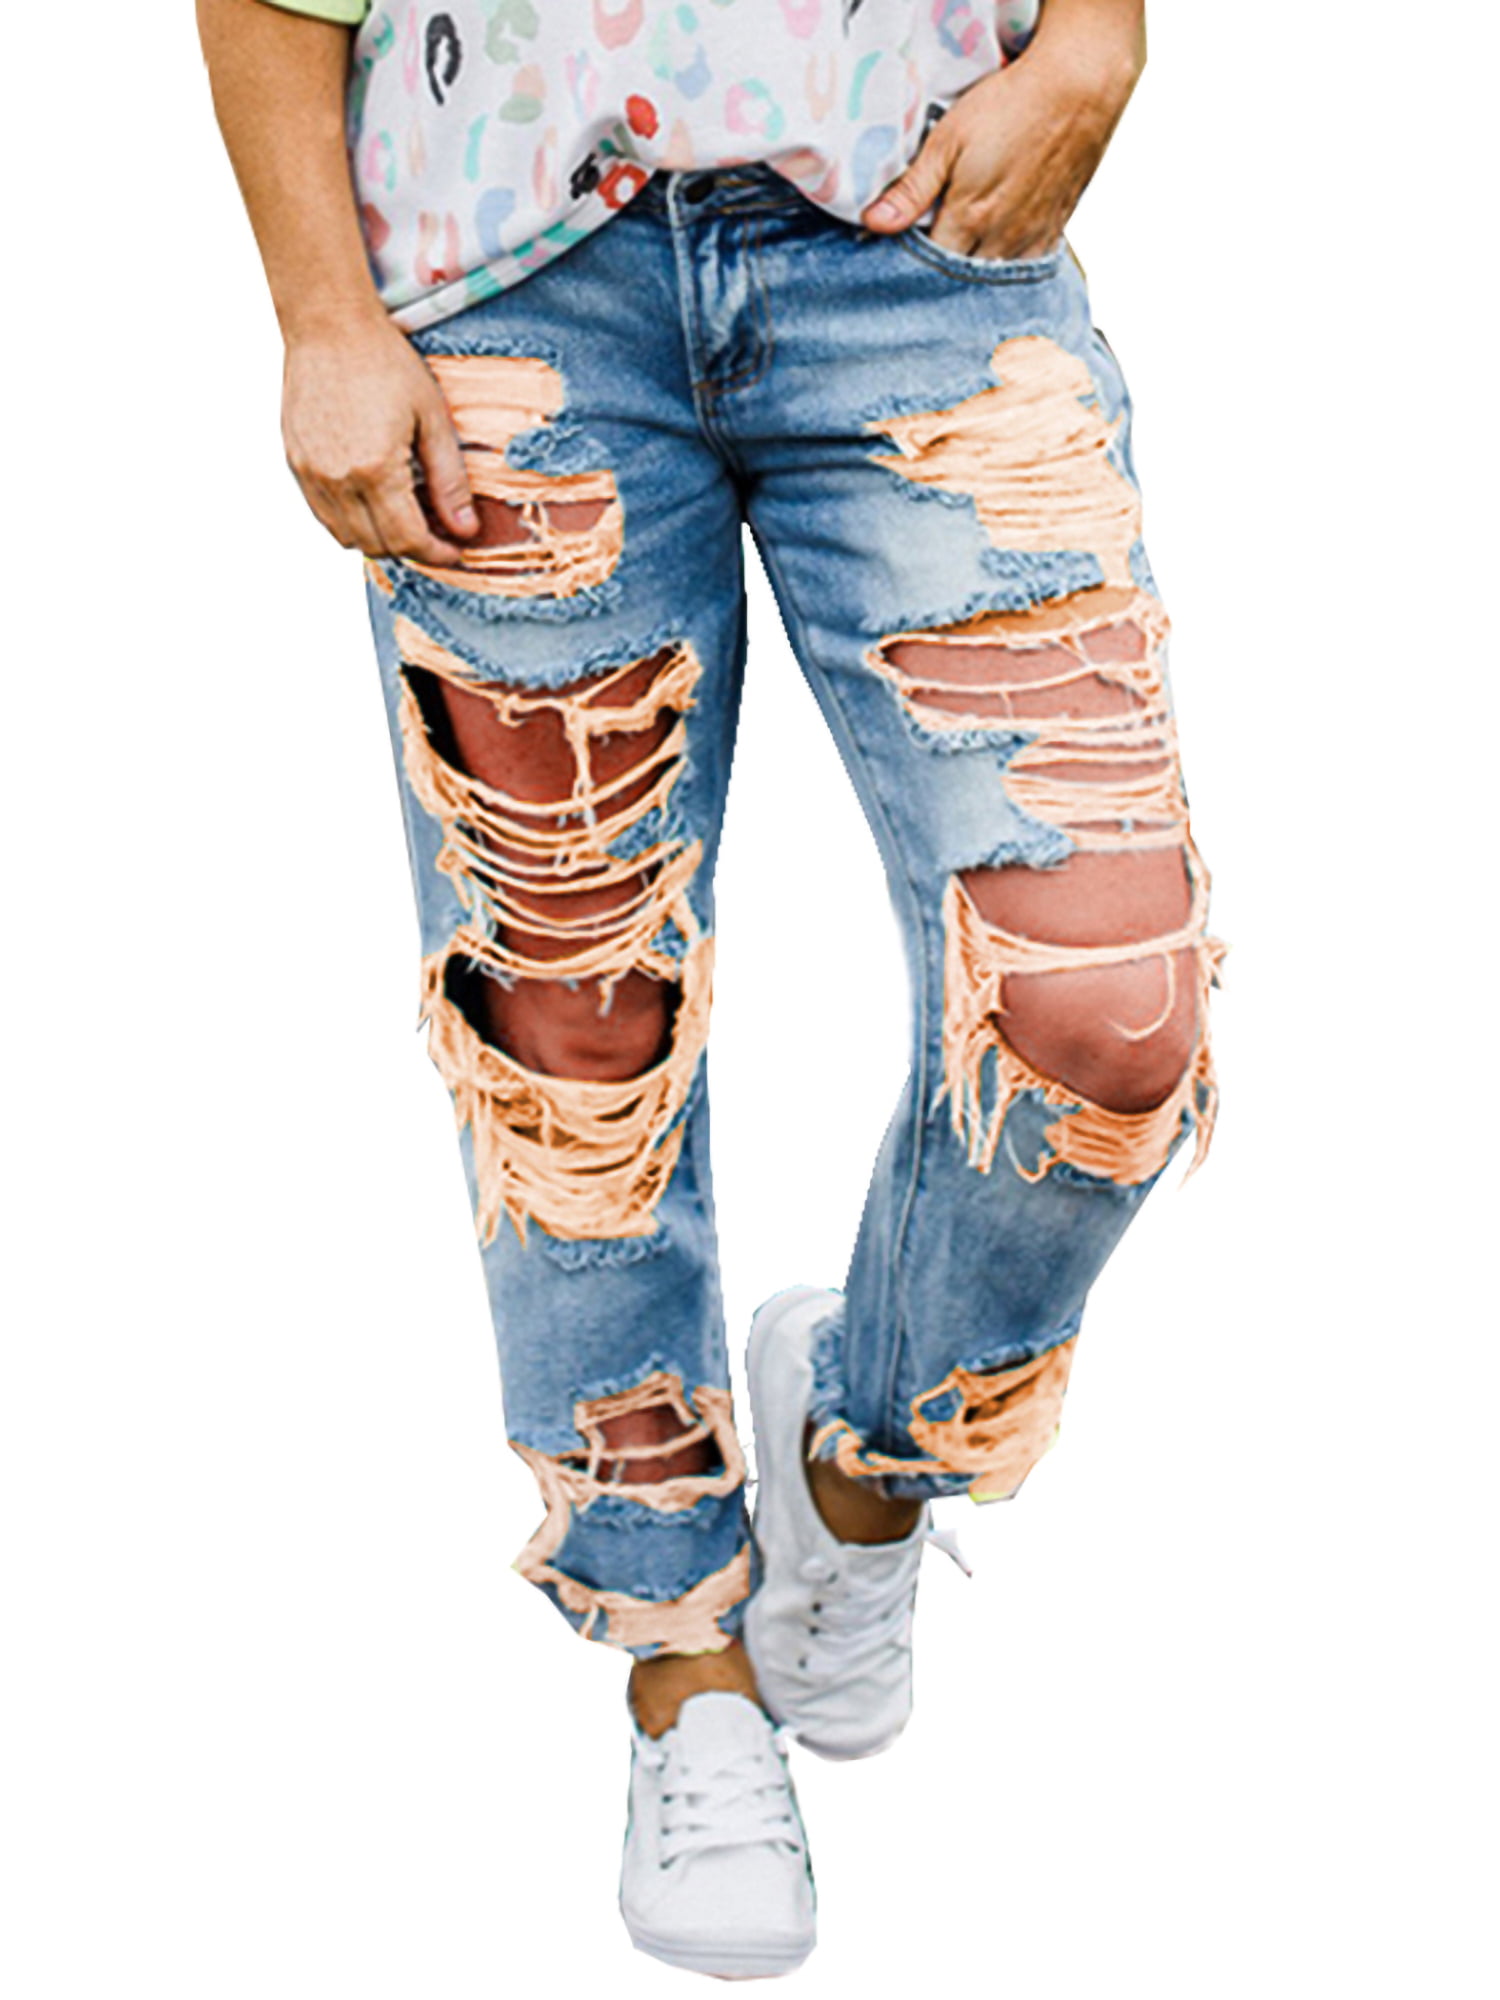 HOSOME Women Jeans Stretch Distressed Ripped Slim Skinny Jeans Trousers Leggings Casual Pants 